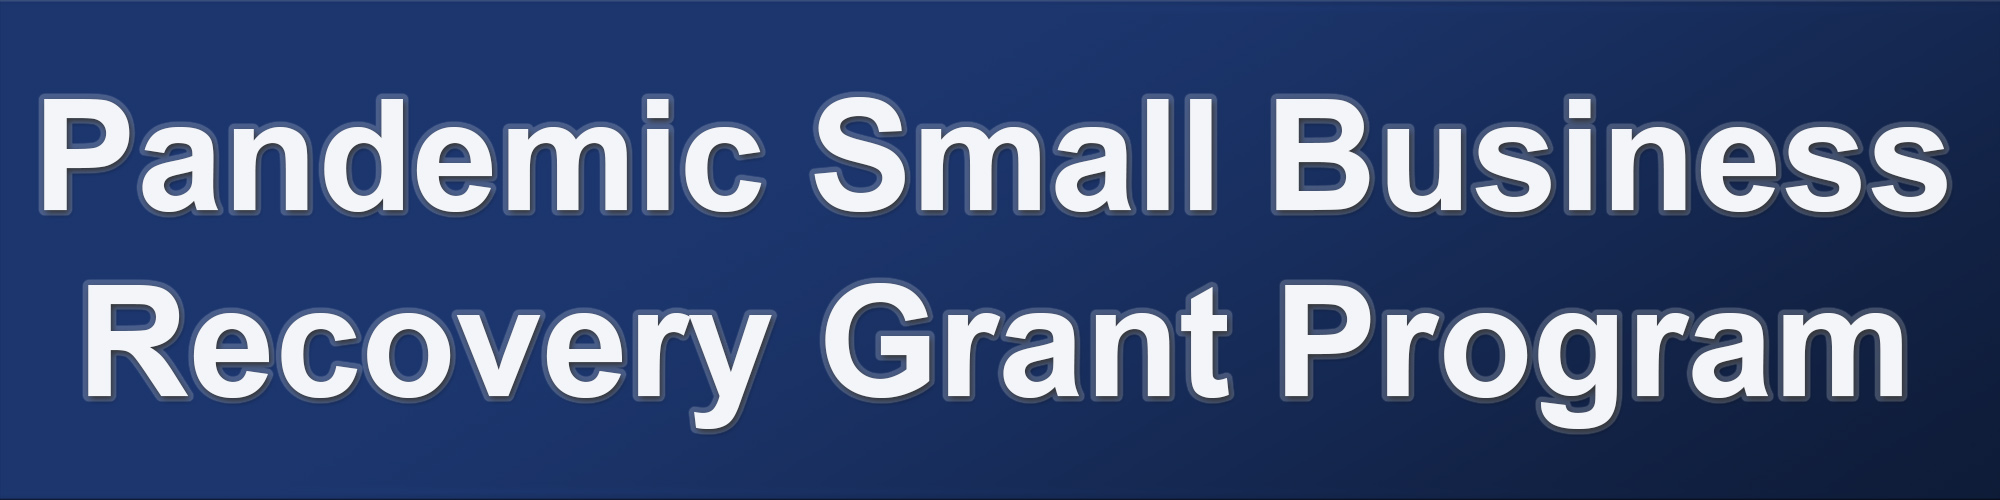 Pandemic Small Business Recovery Grant Program